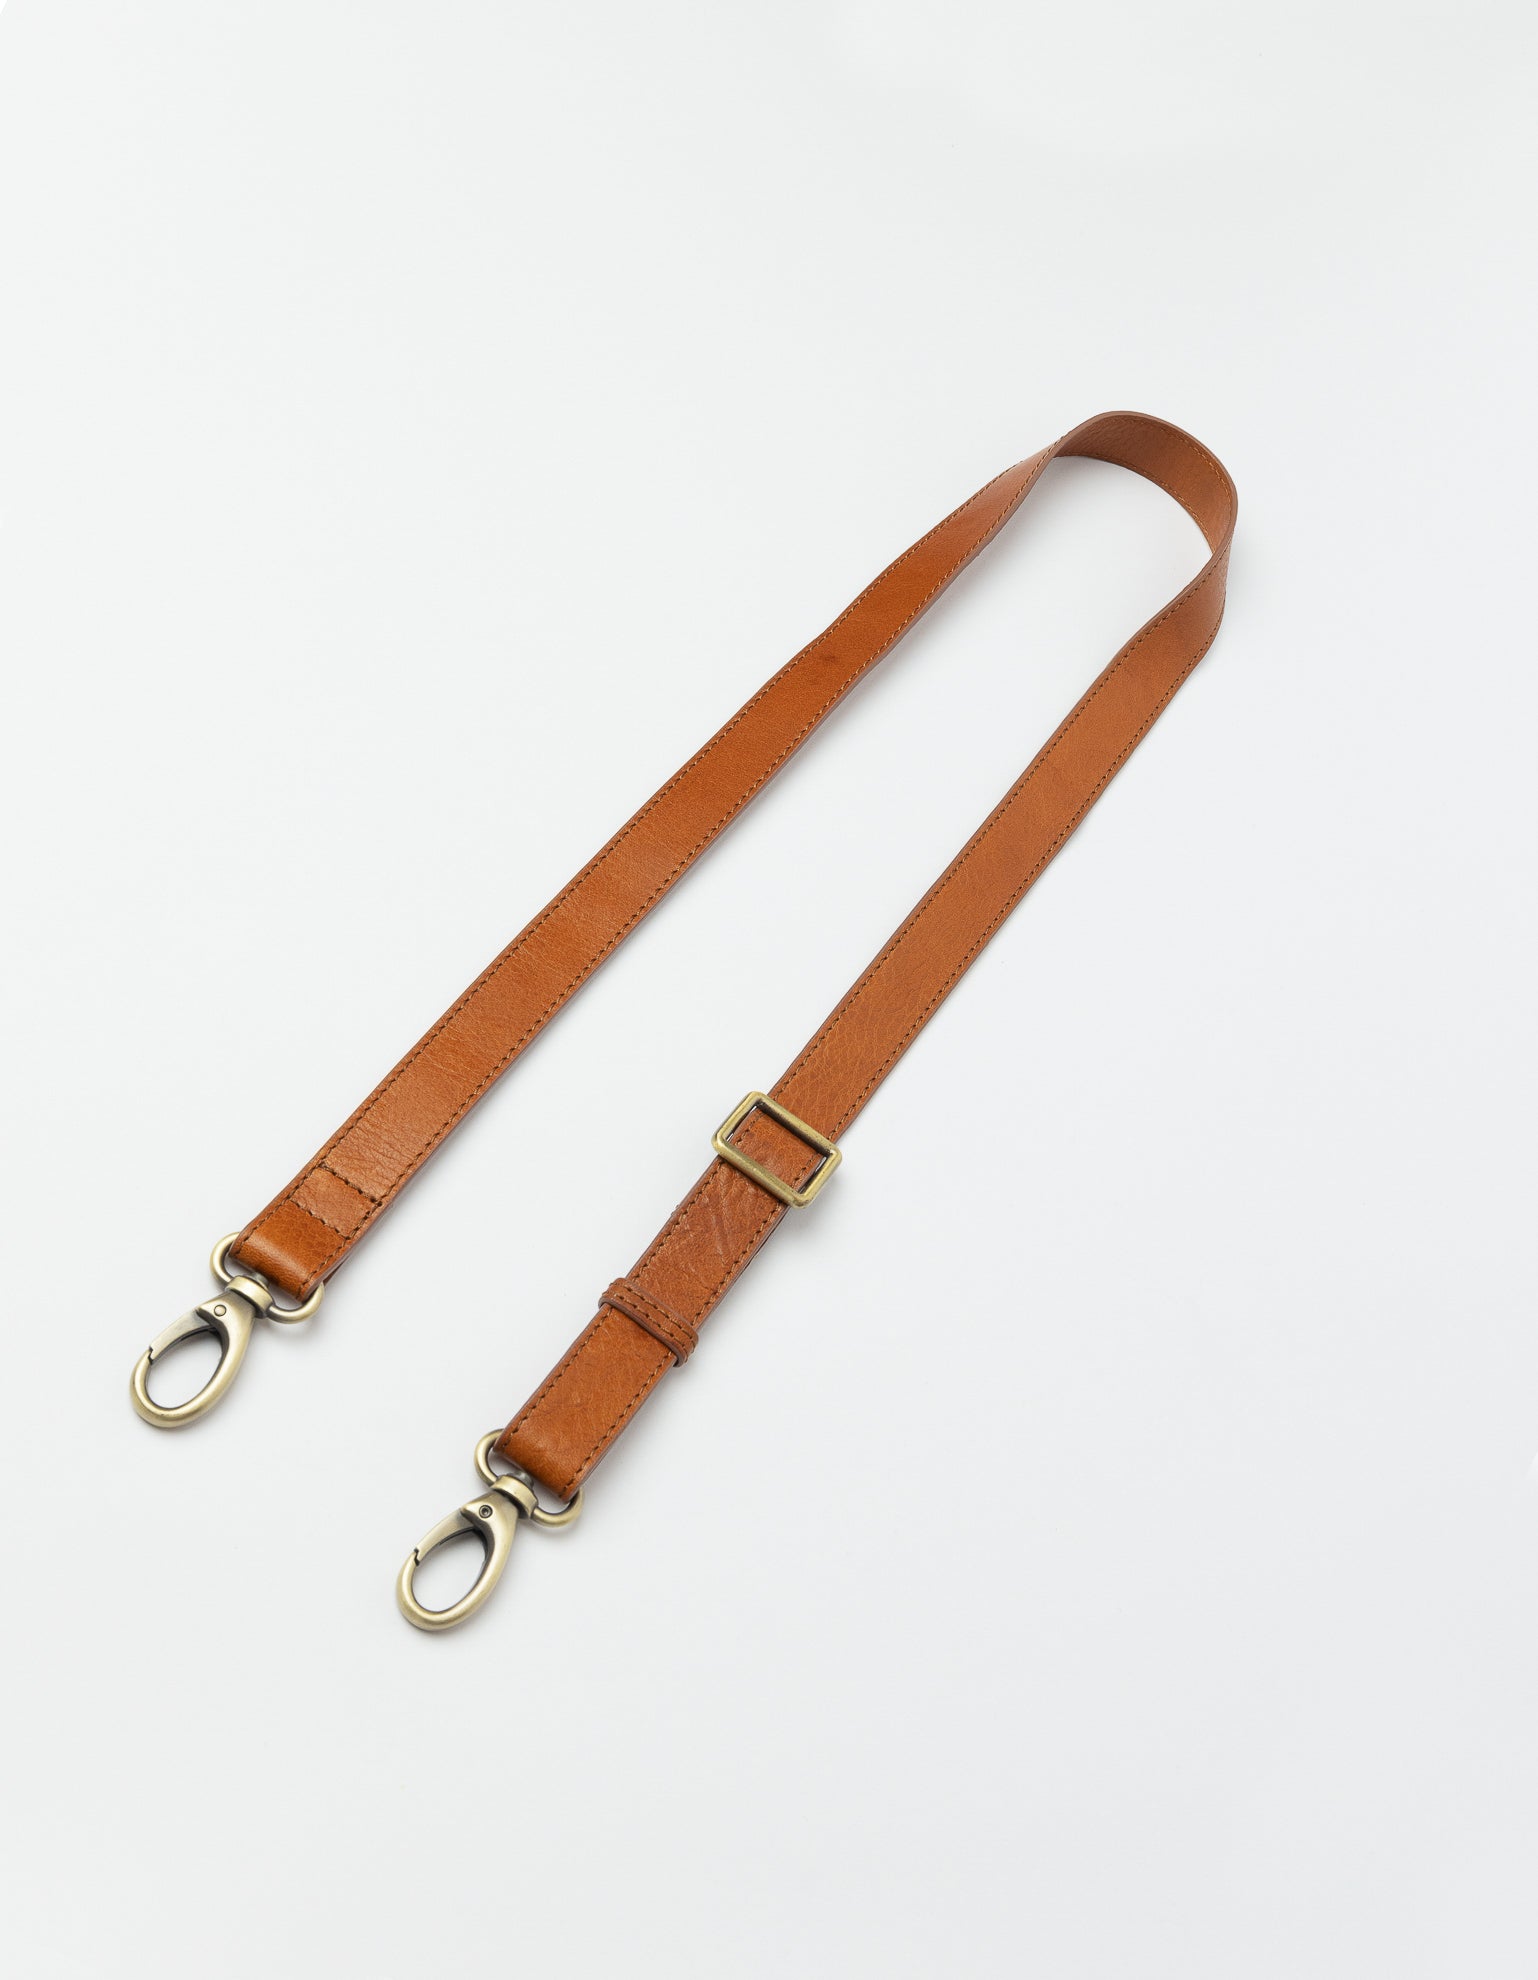 Bum Bag Strap in Cognac Stromboli Leather. Front product image.